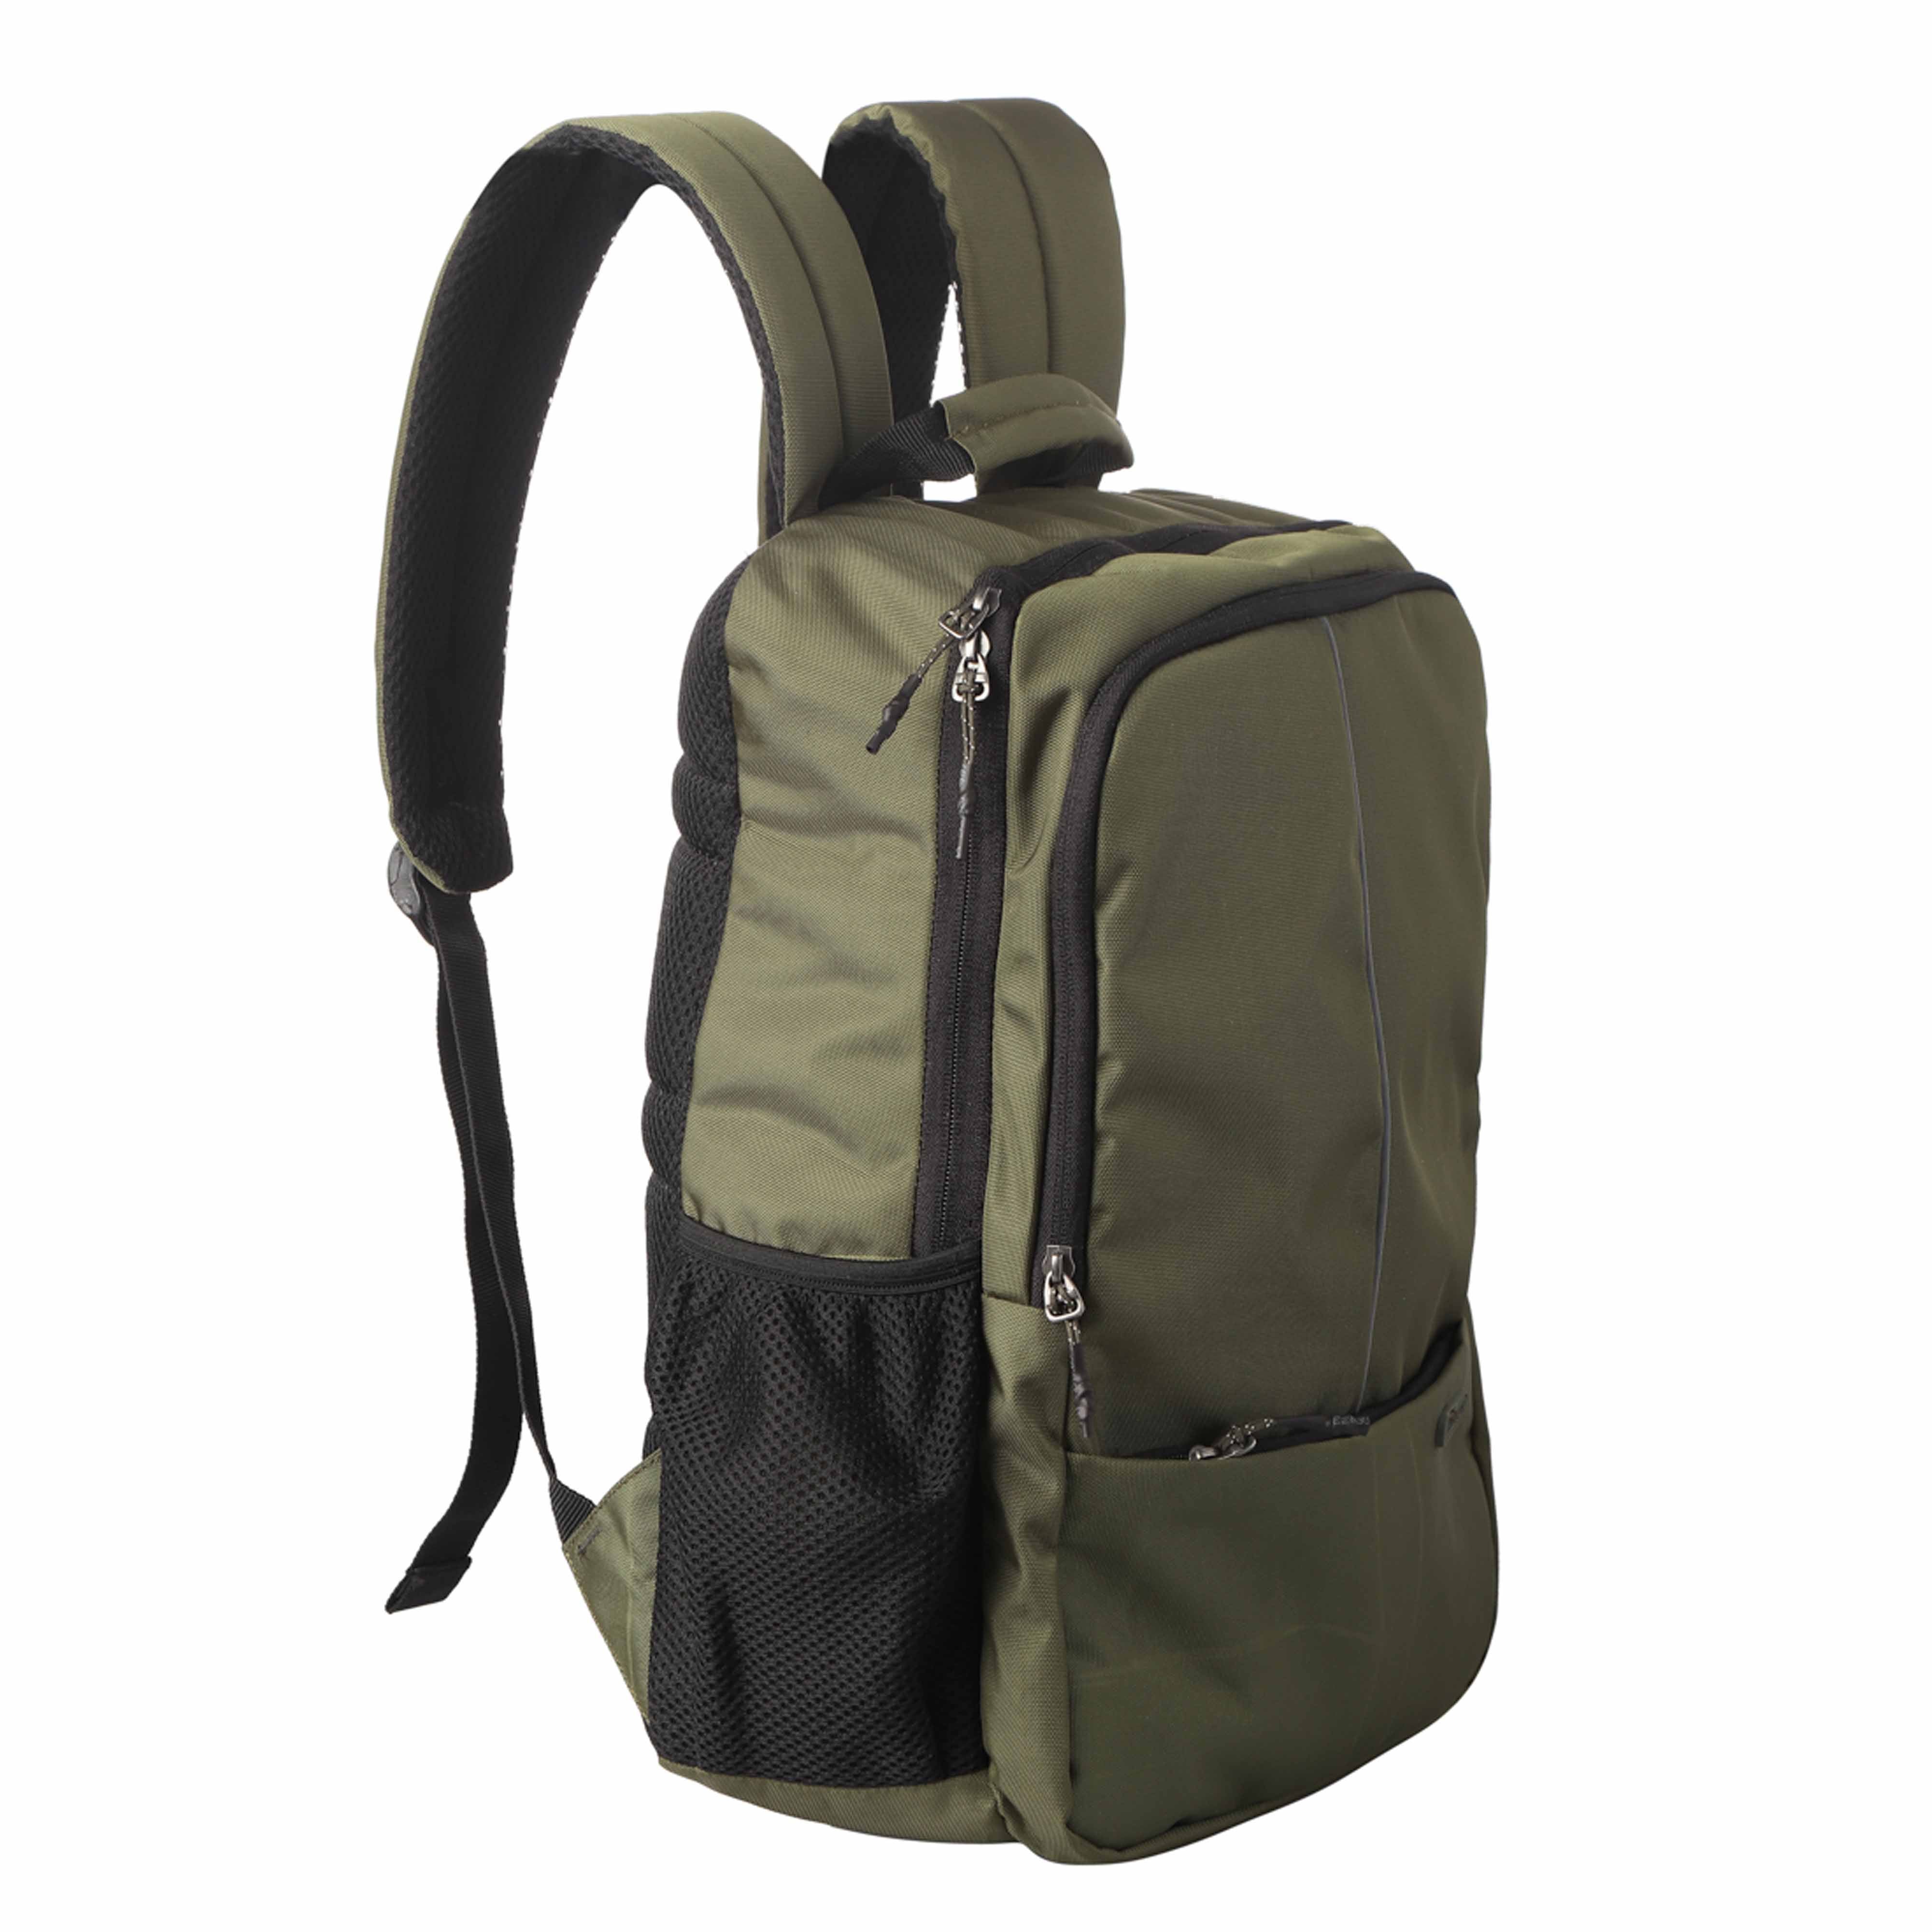 The Calibre Backpack